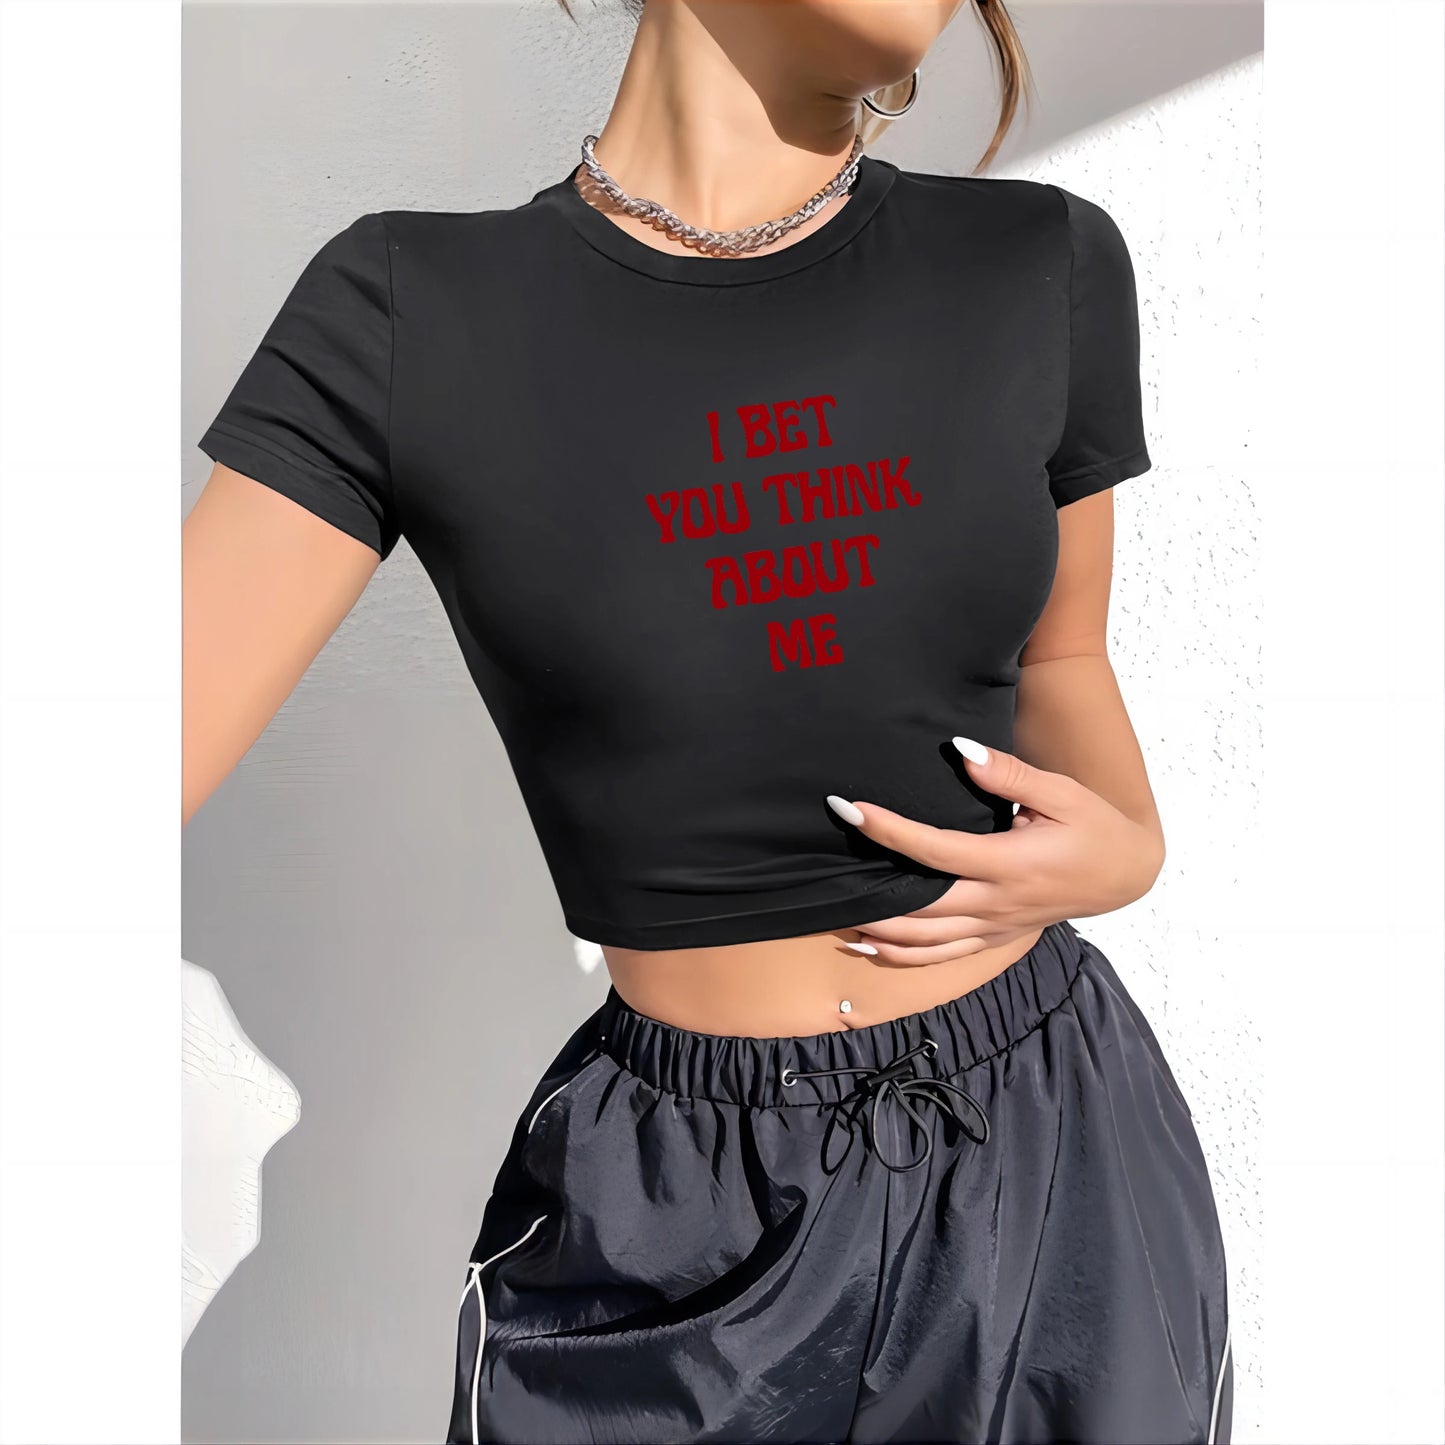 I Love My Autistic Girlfriend T-Shirt, Matching Autistic Couples Shirt, I Love My Autistic Boyfriend Shirt, His and Her T-Shirt,